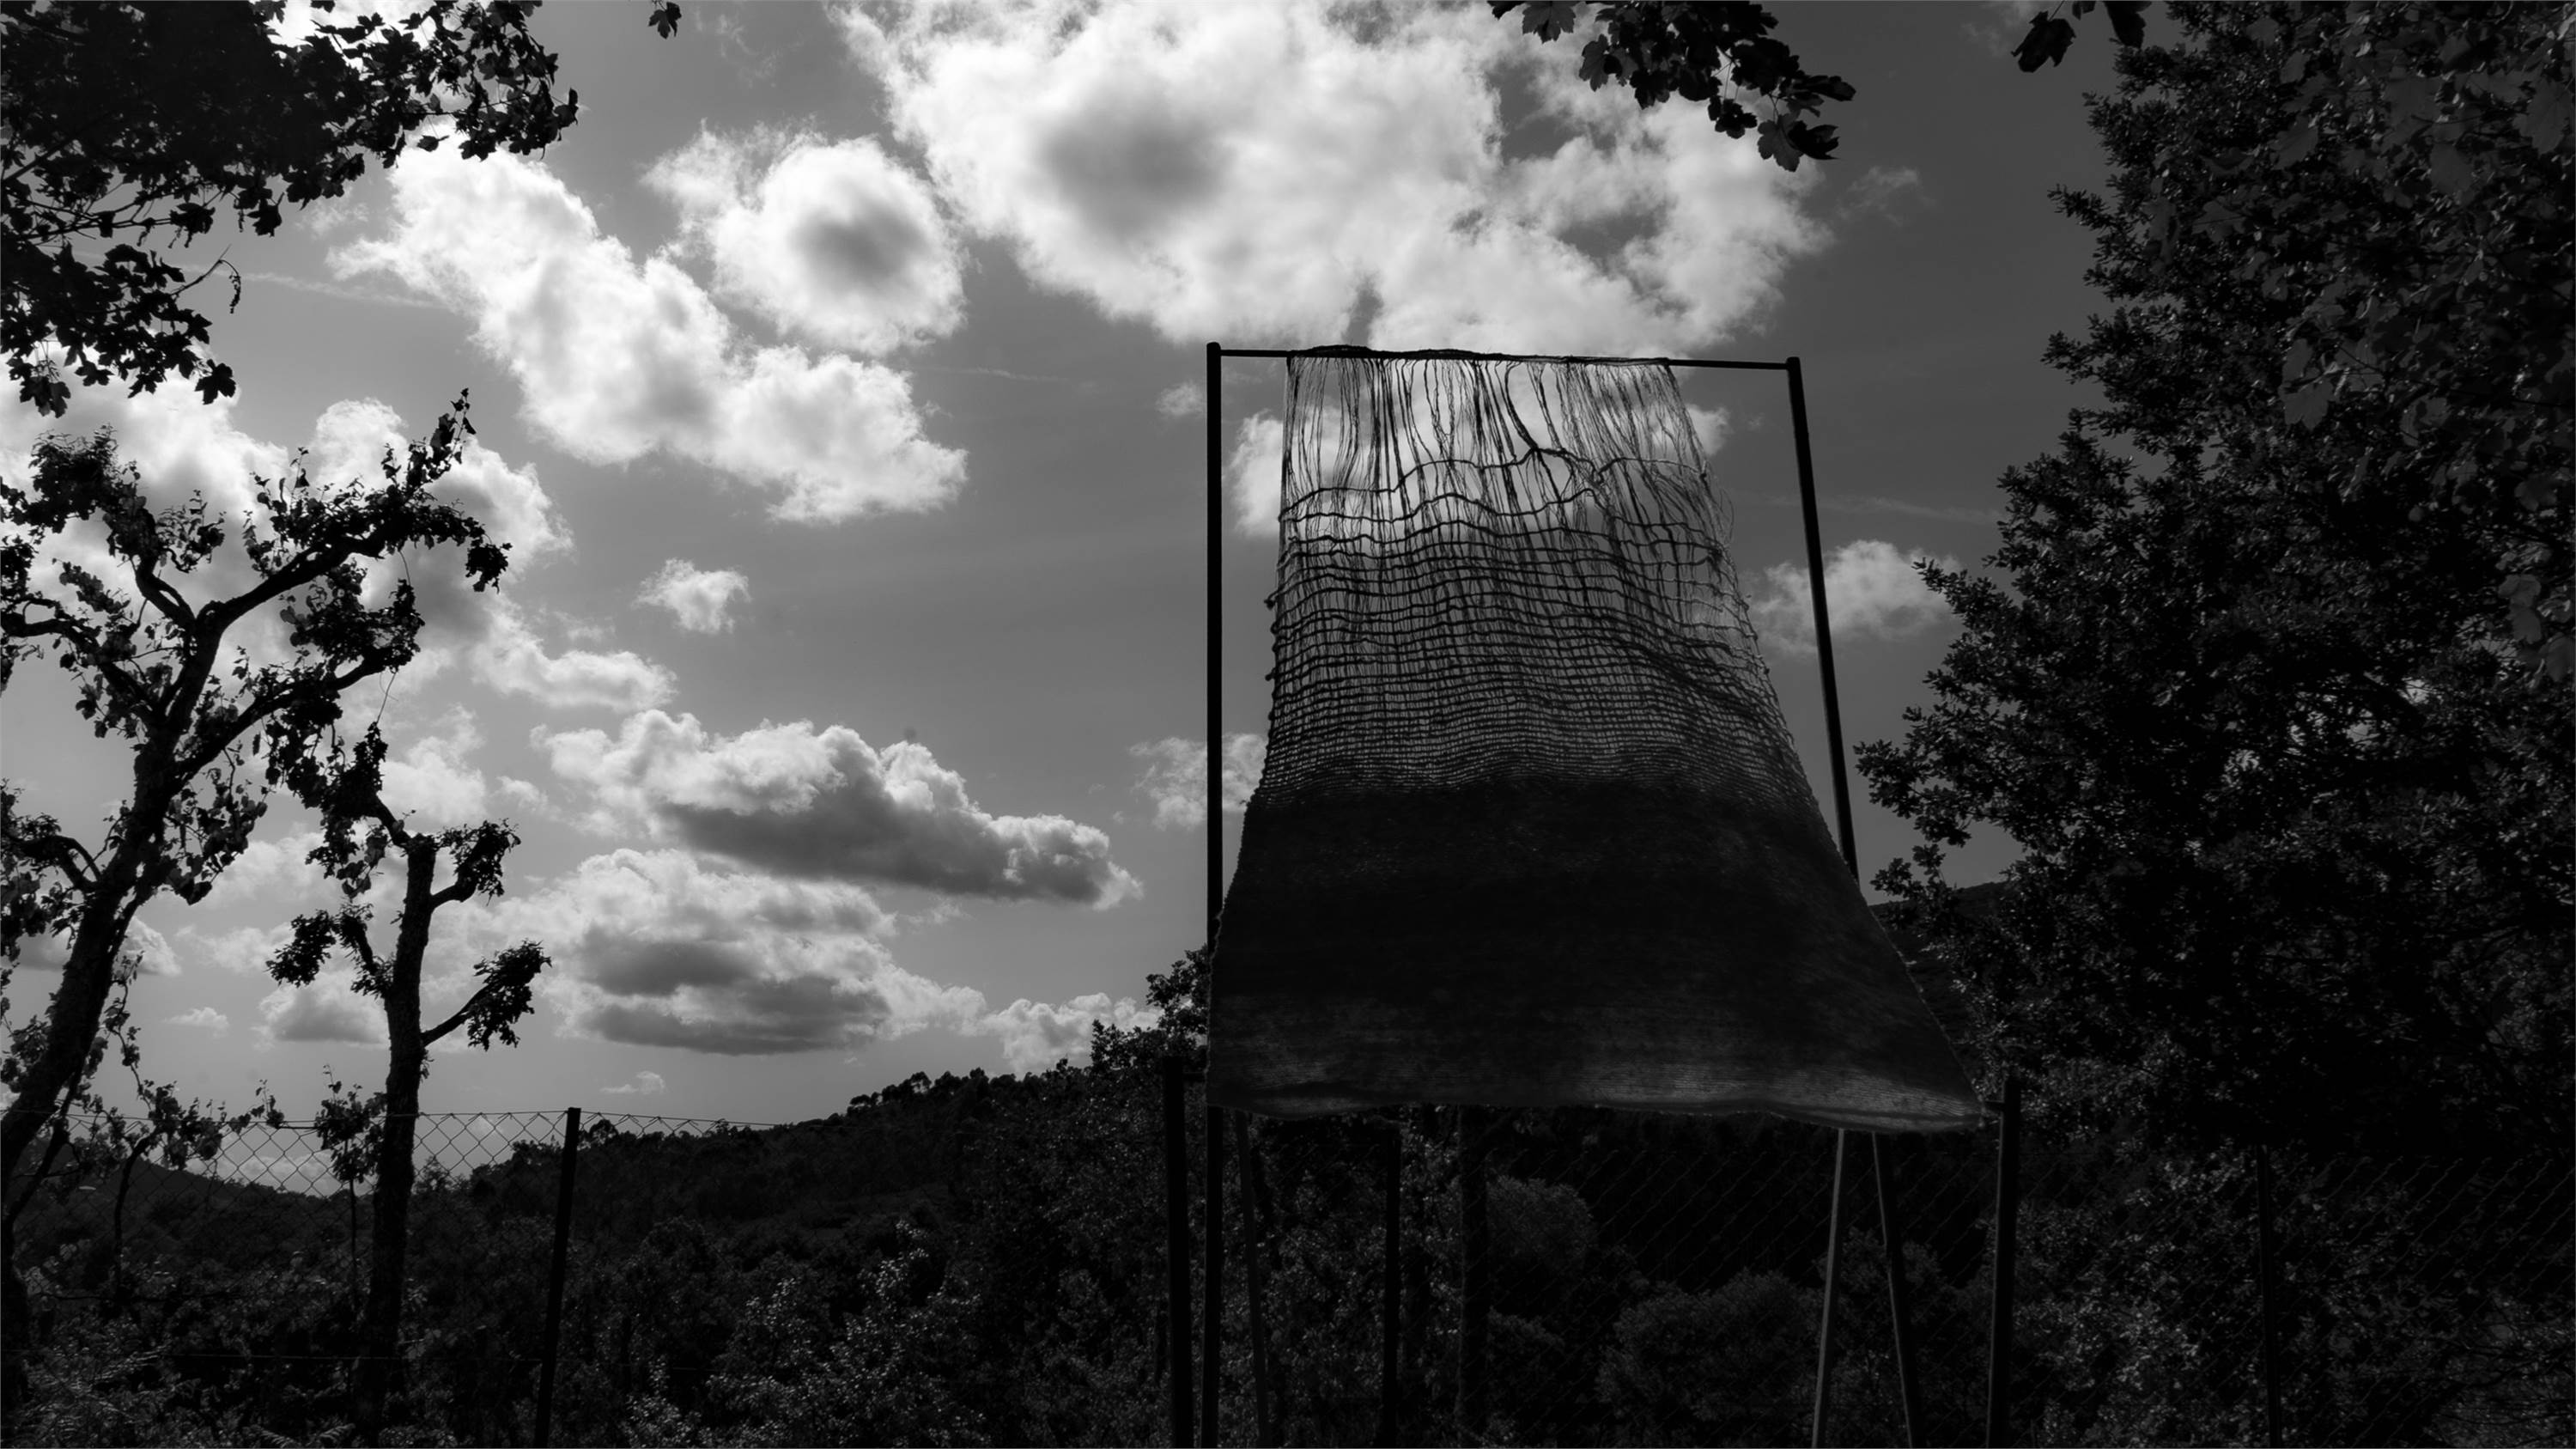 18.05.2021. Patricia Oliveira was in an  artistic residency at Casa da Lã (House of wool) in Bucos, Cabeceiras de Basto. The artist spent 10 months working in collaboration with the women of Bucos in the production of an art installation based on wool. "Montanha" (Mountain) (2021) is the result of the artwork presented on May 18th, International Museum Day.